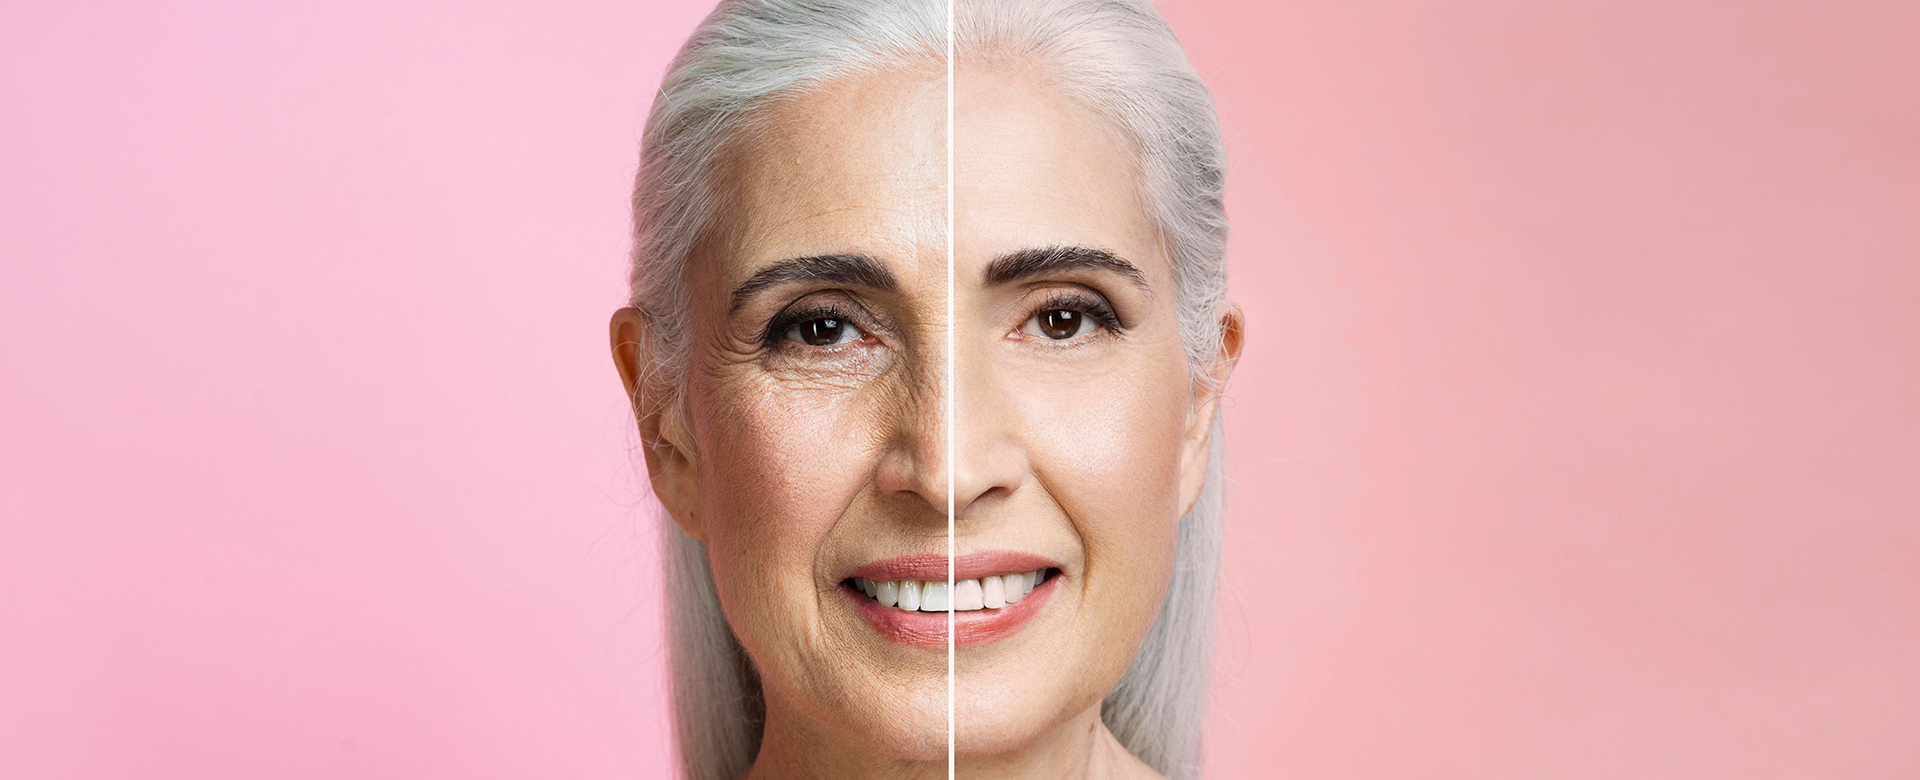 HGH for Anti-Aging - Comparison of Before and After Treatment on Mature Woman's Face